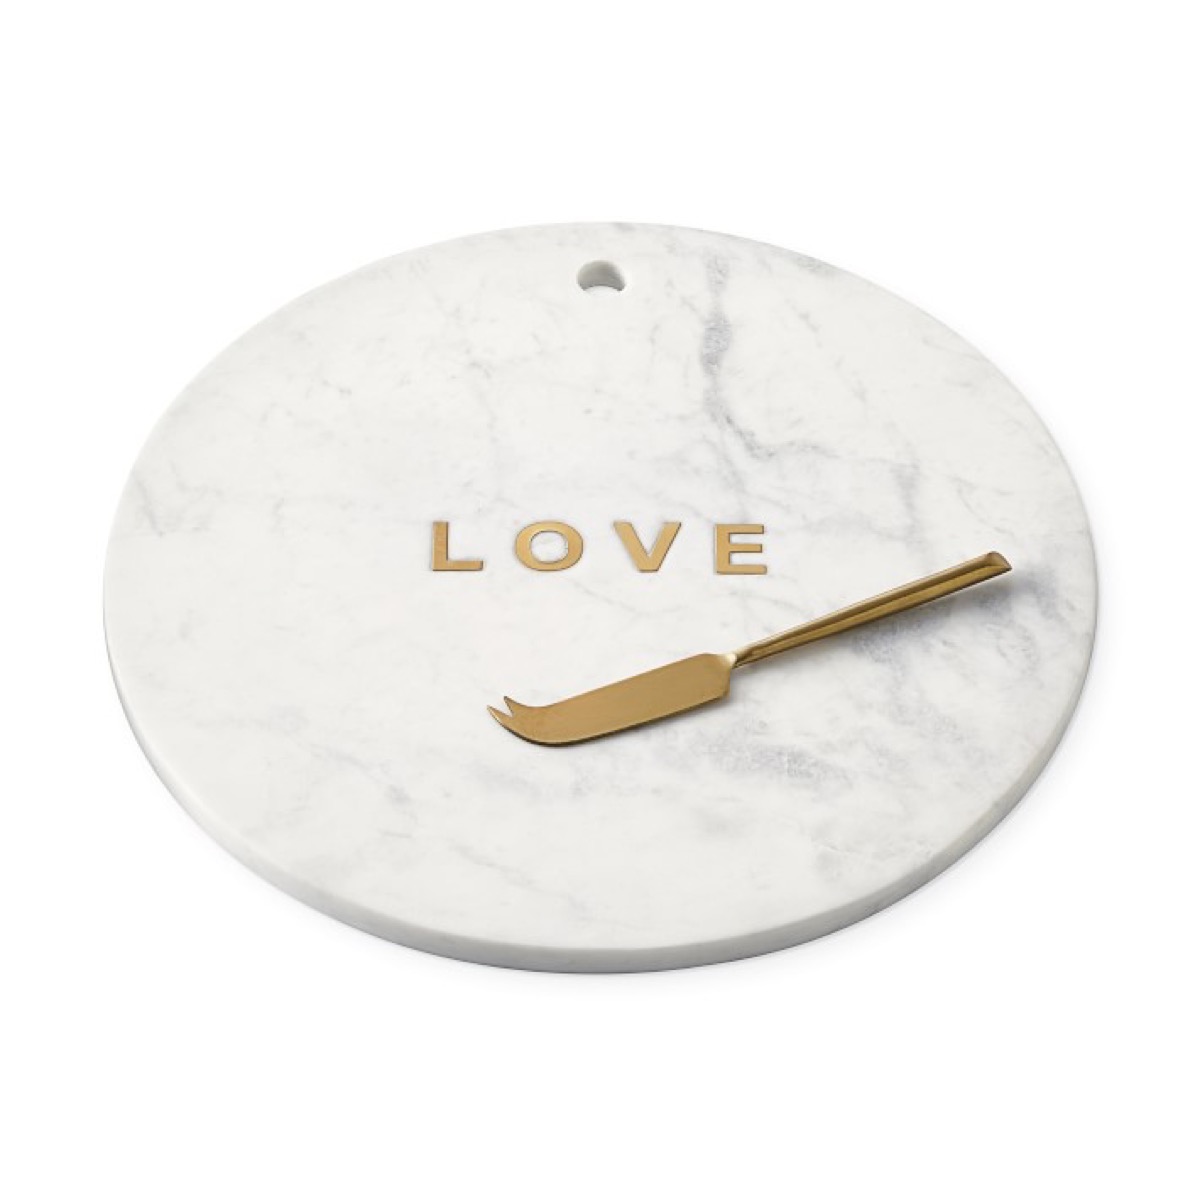 Love Cheese Board {Valentine's Day Gifts}